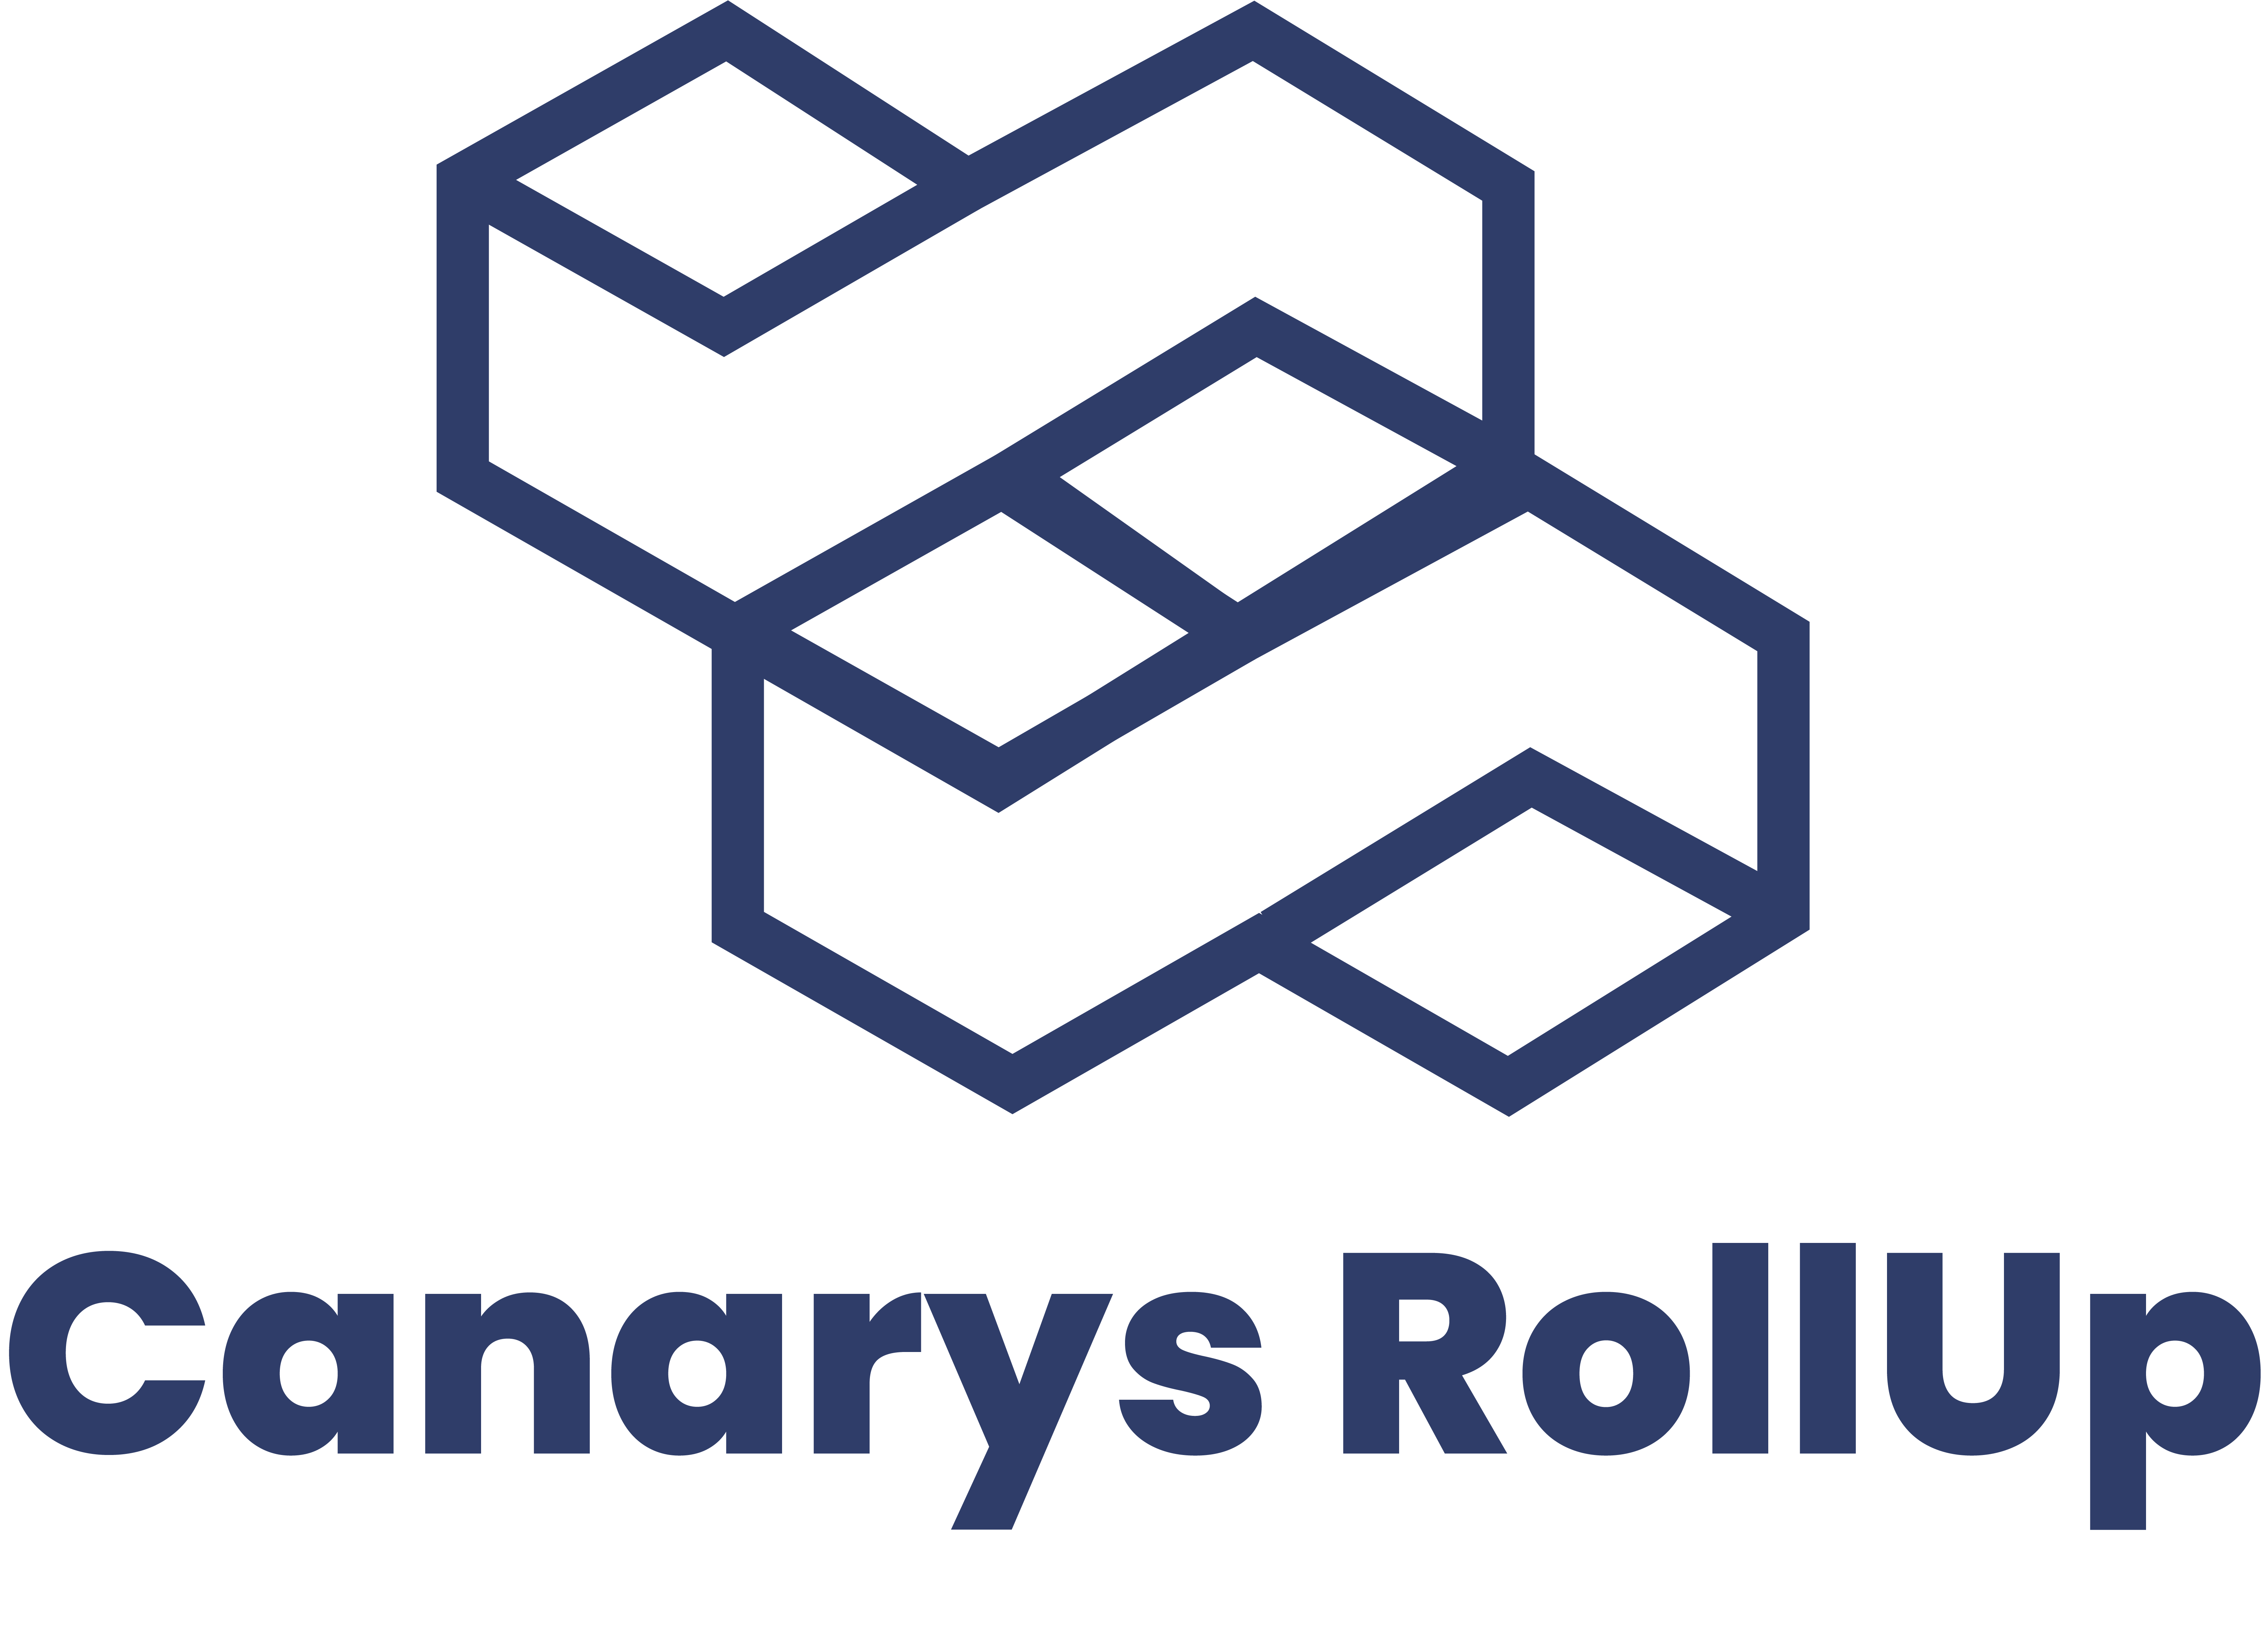 Canarys Rollup